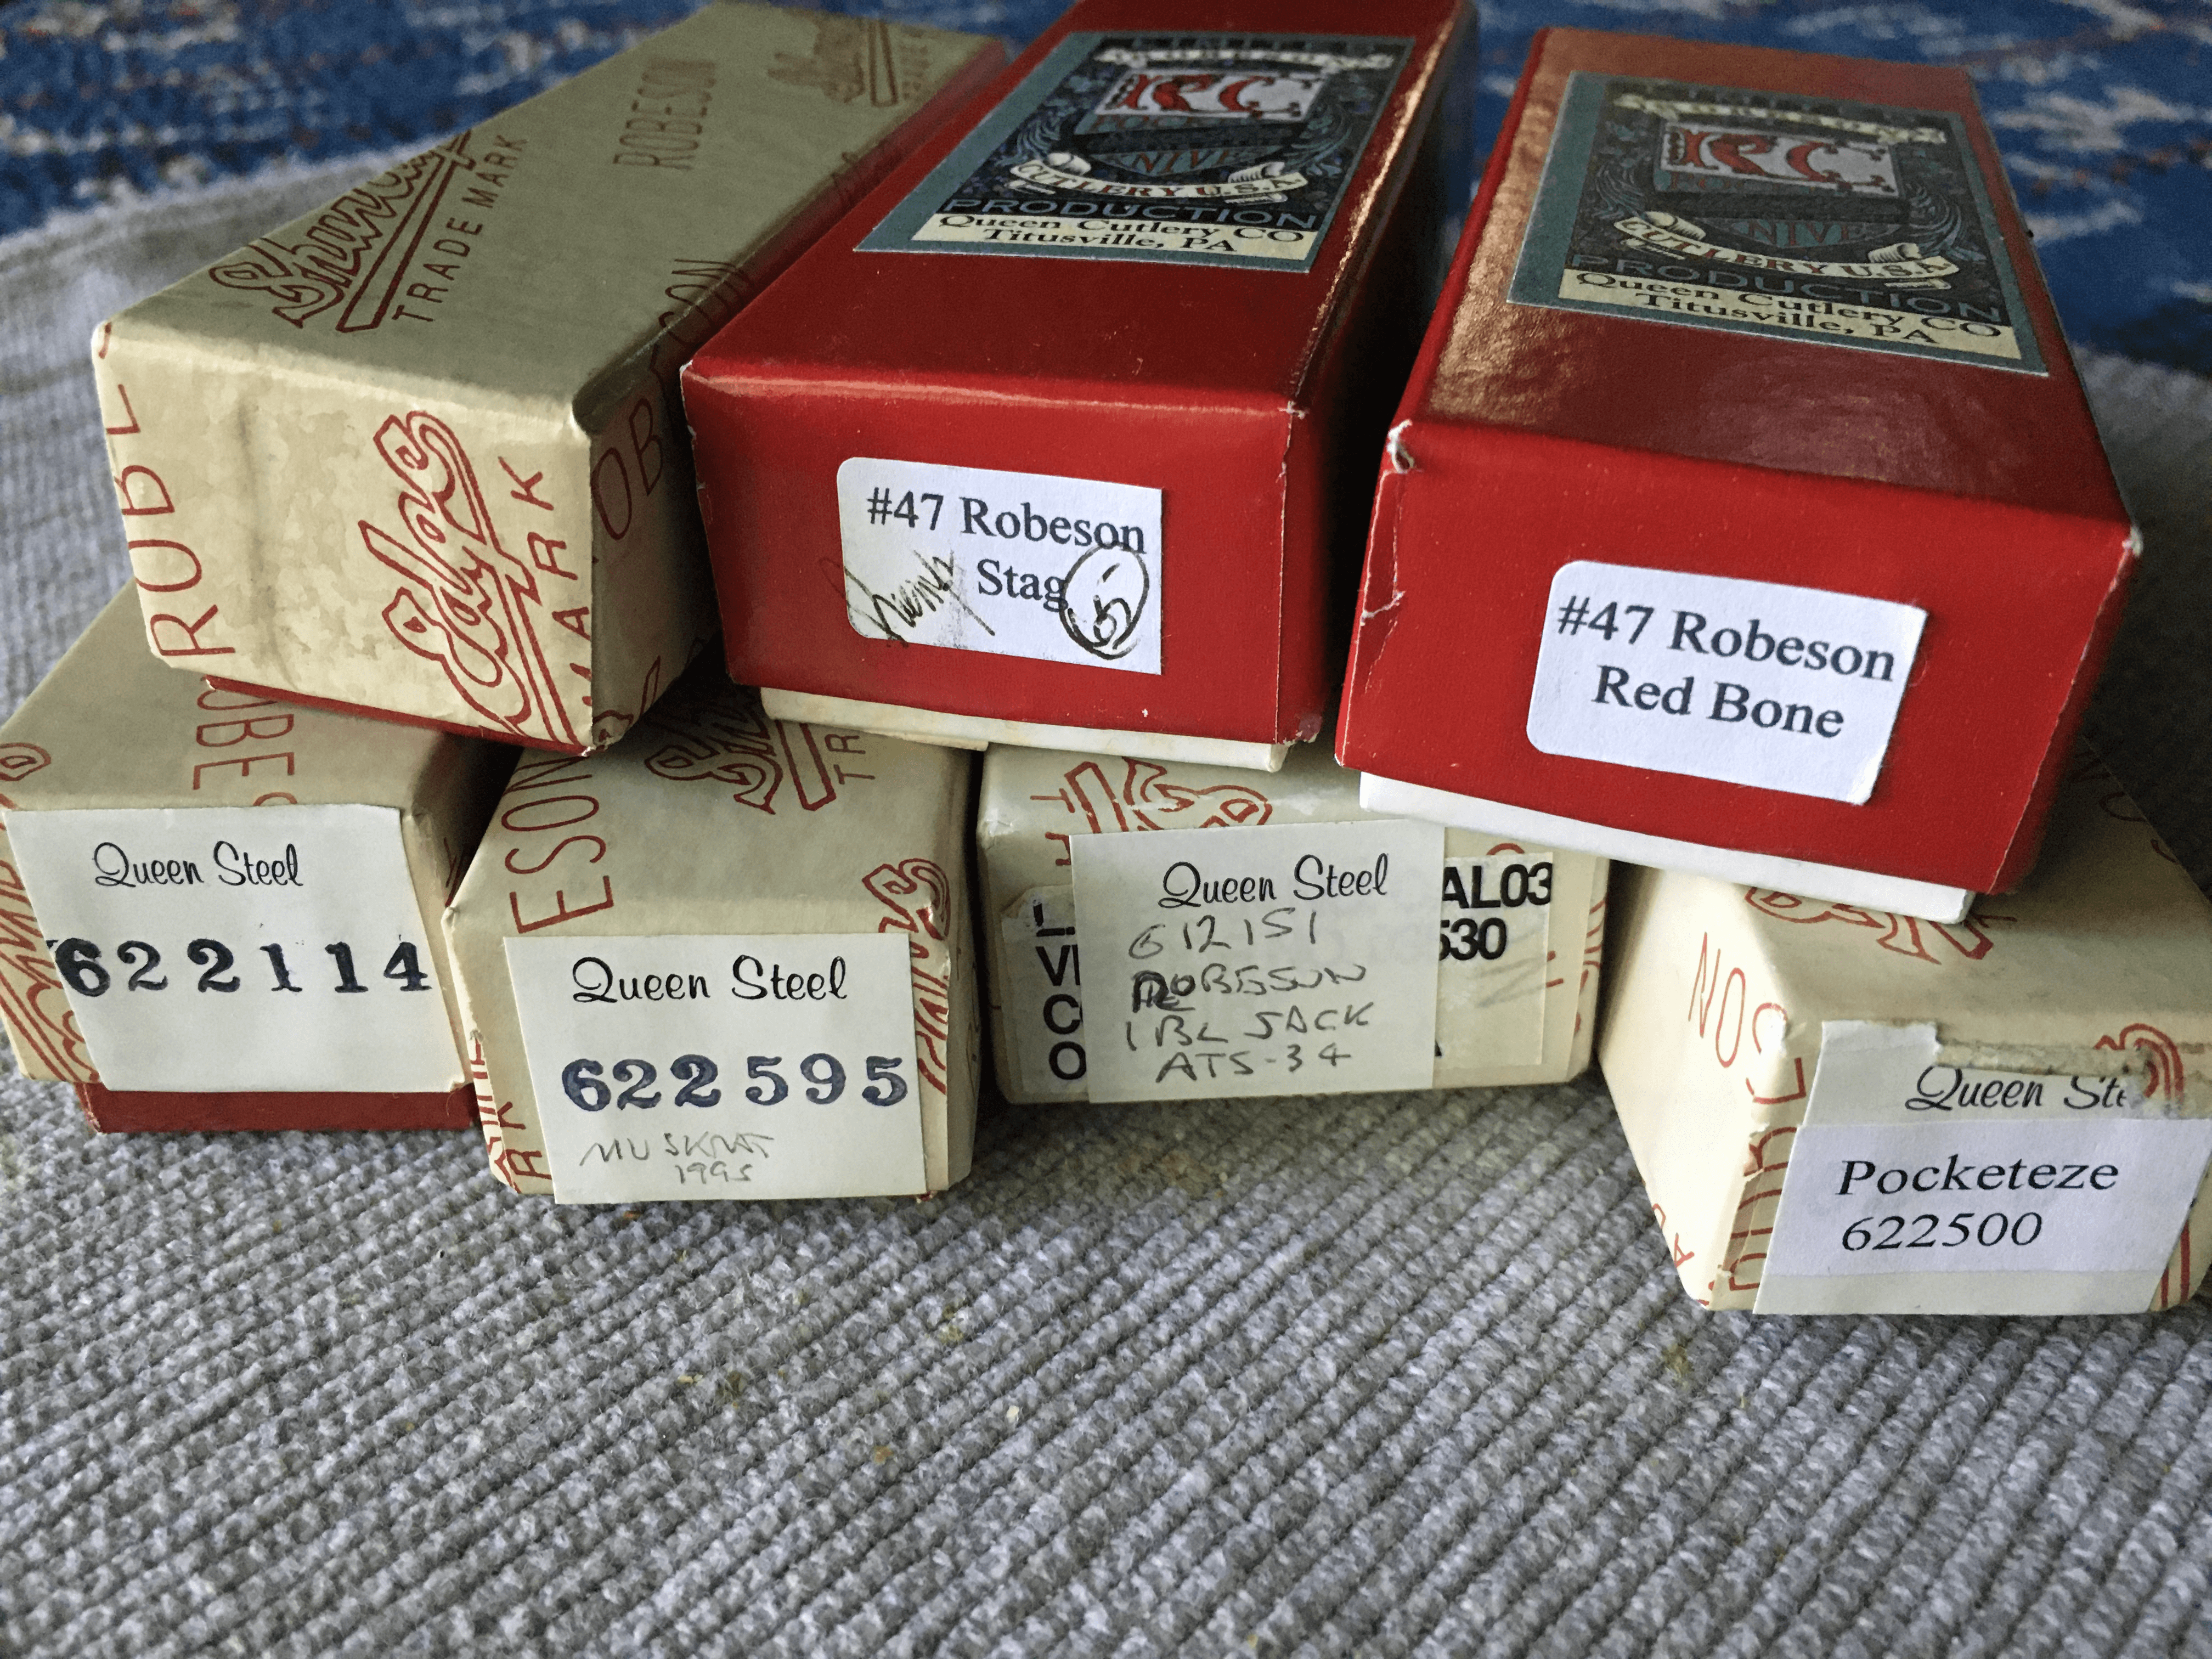 End labels for 1990's Robeson boxes